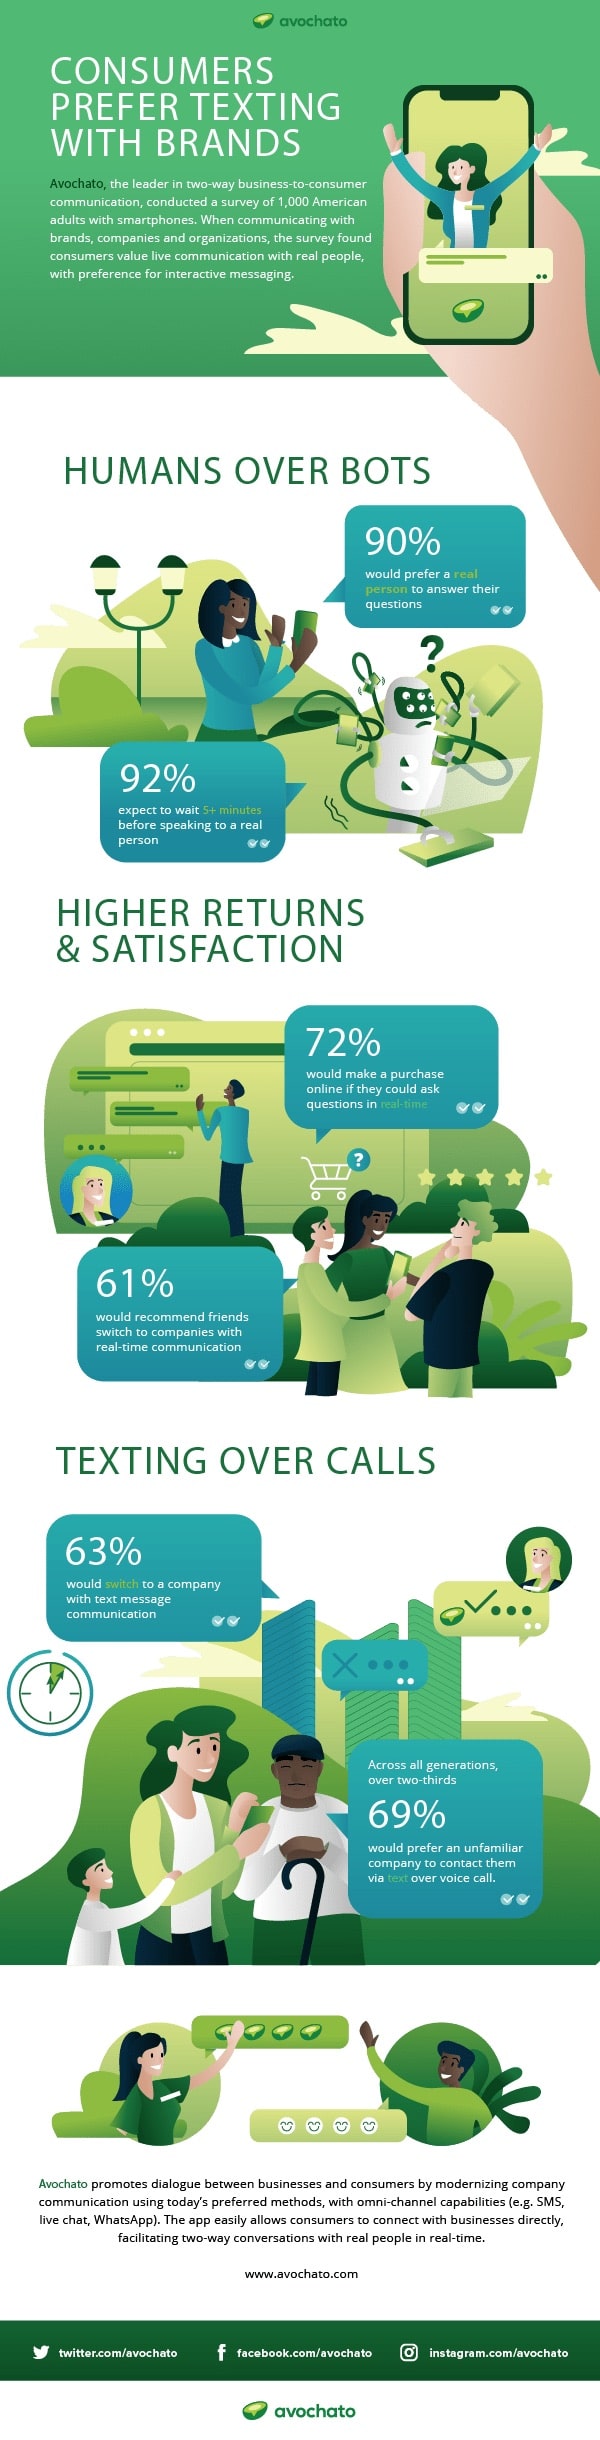 It’s 2020—is your brand texting with customers yet?